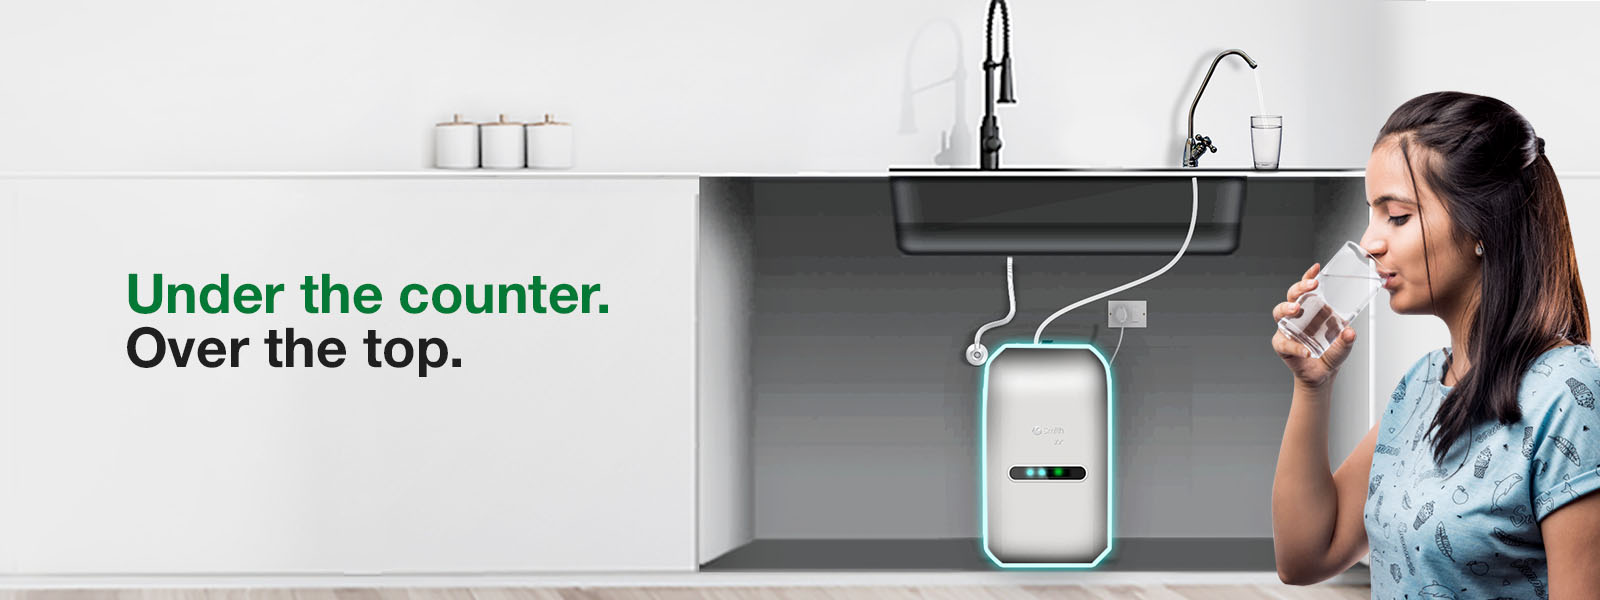 Available Water Purifier technologies & emerging trend of Under the Counter Water Purifiers